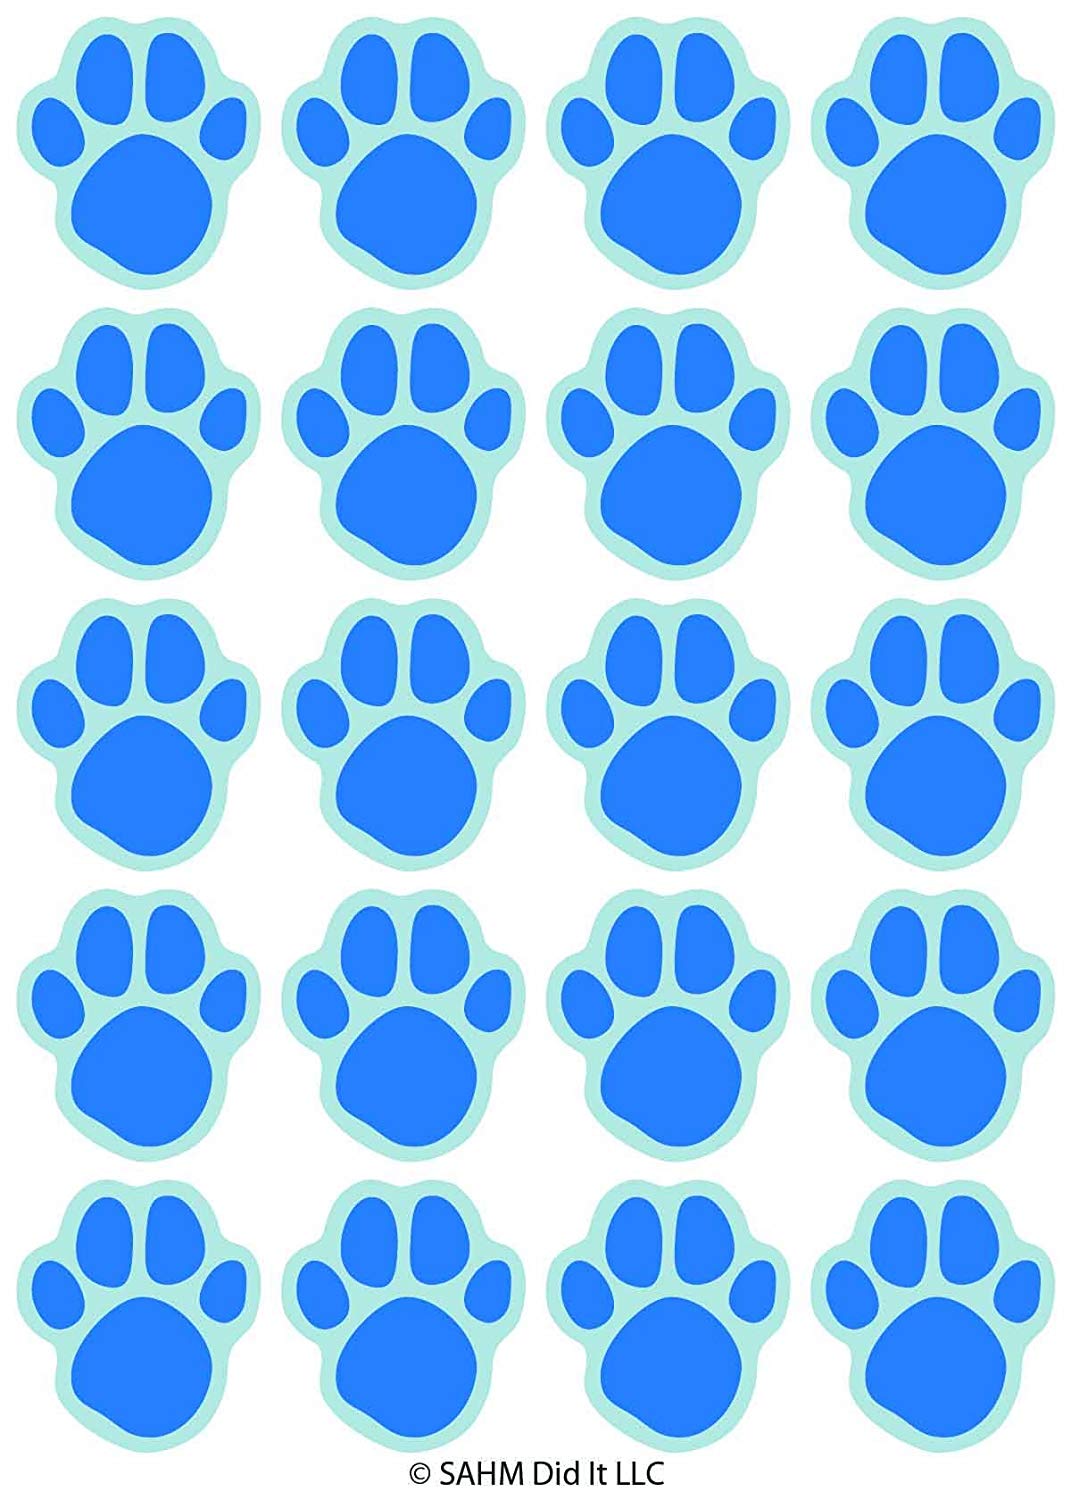 Gavmild Shah væsentligt SAHM Blue Paw Print Stickers - 120 Dog Cat Animal Paws 1 inch Small for Boy  Or Girl - Great for Birthday Party Favors - Clues - Scrapbook - Calendar -  Teachers Reward - Labels - Handcrafted